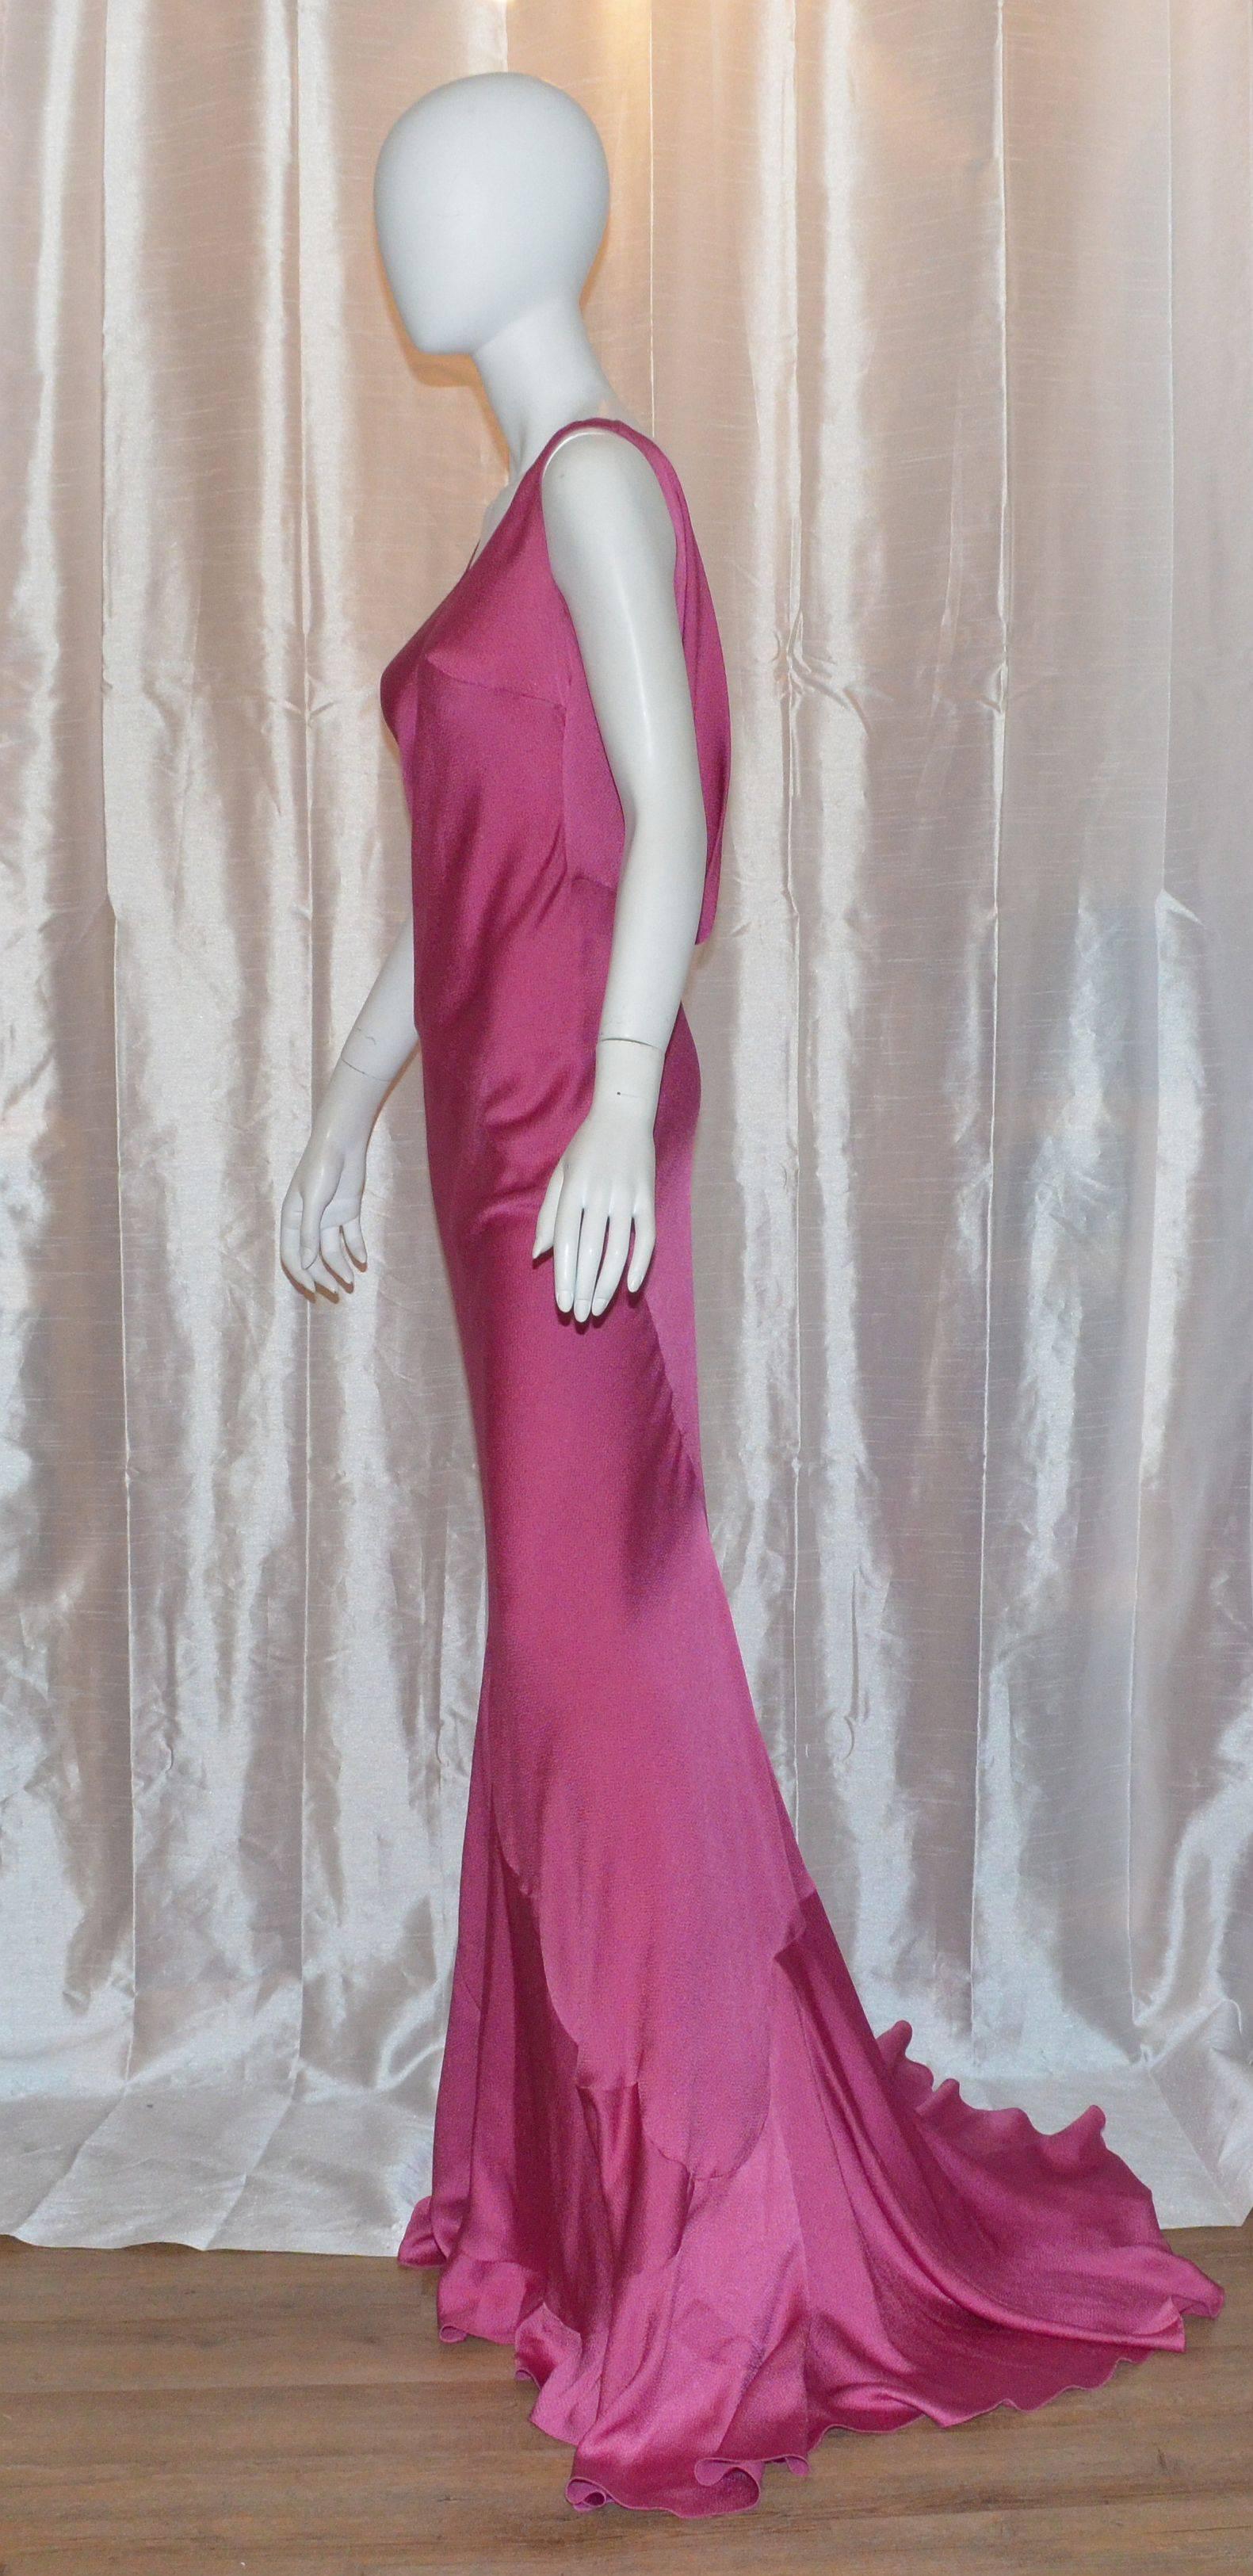 John Galliano Circa 1996 Vintage Bias Cut Hammered Silk Dress Gown with a draped back and scallop seam details.
John Galliano gown is bias cut featured in a fuchsia-colored hammered silk fabric, v-neckline, and a draped open back. Gown was worn